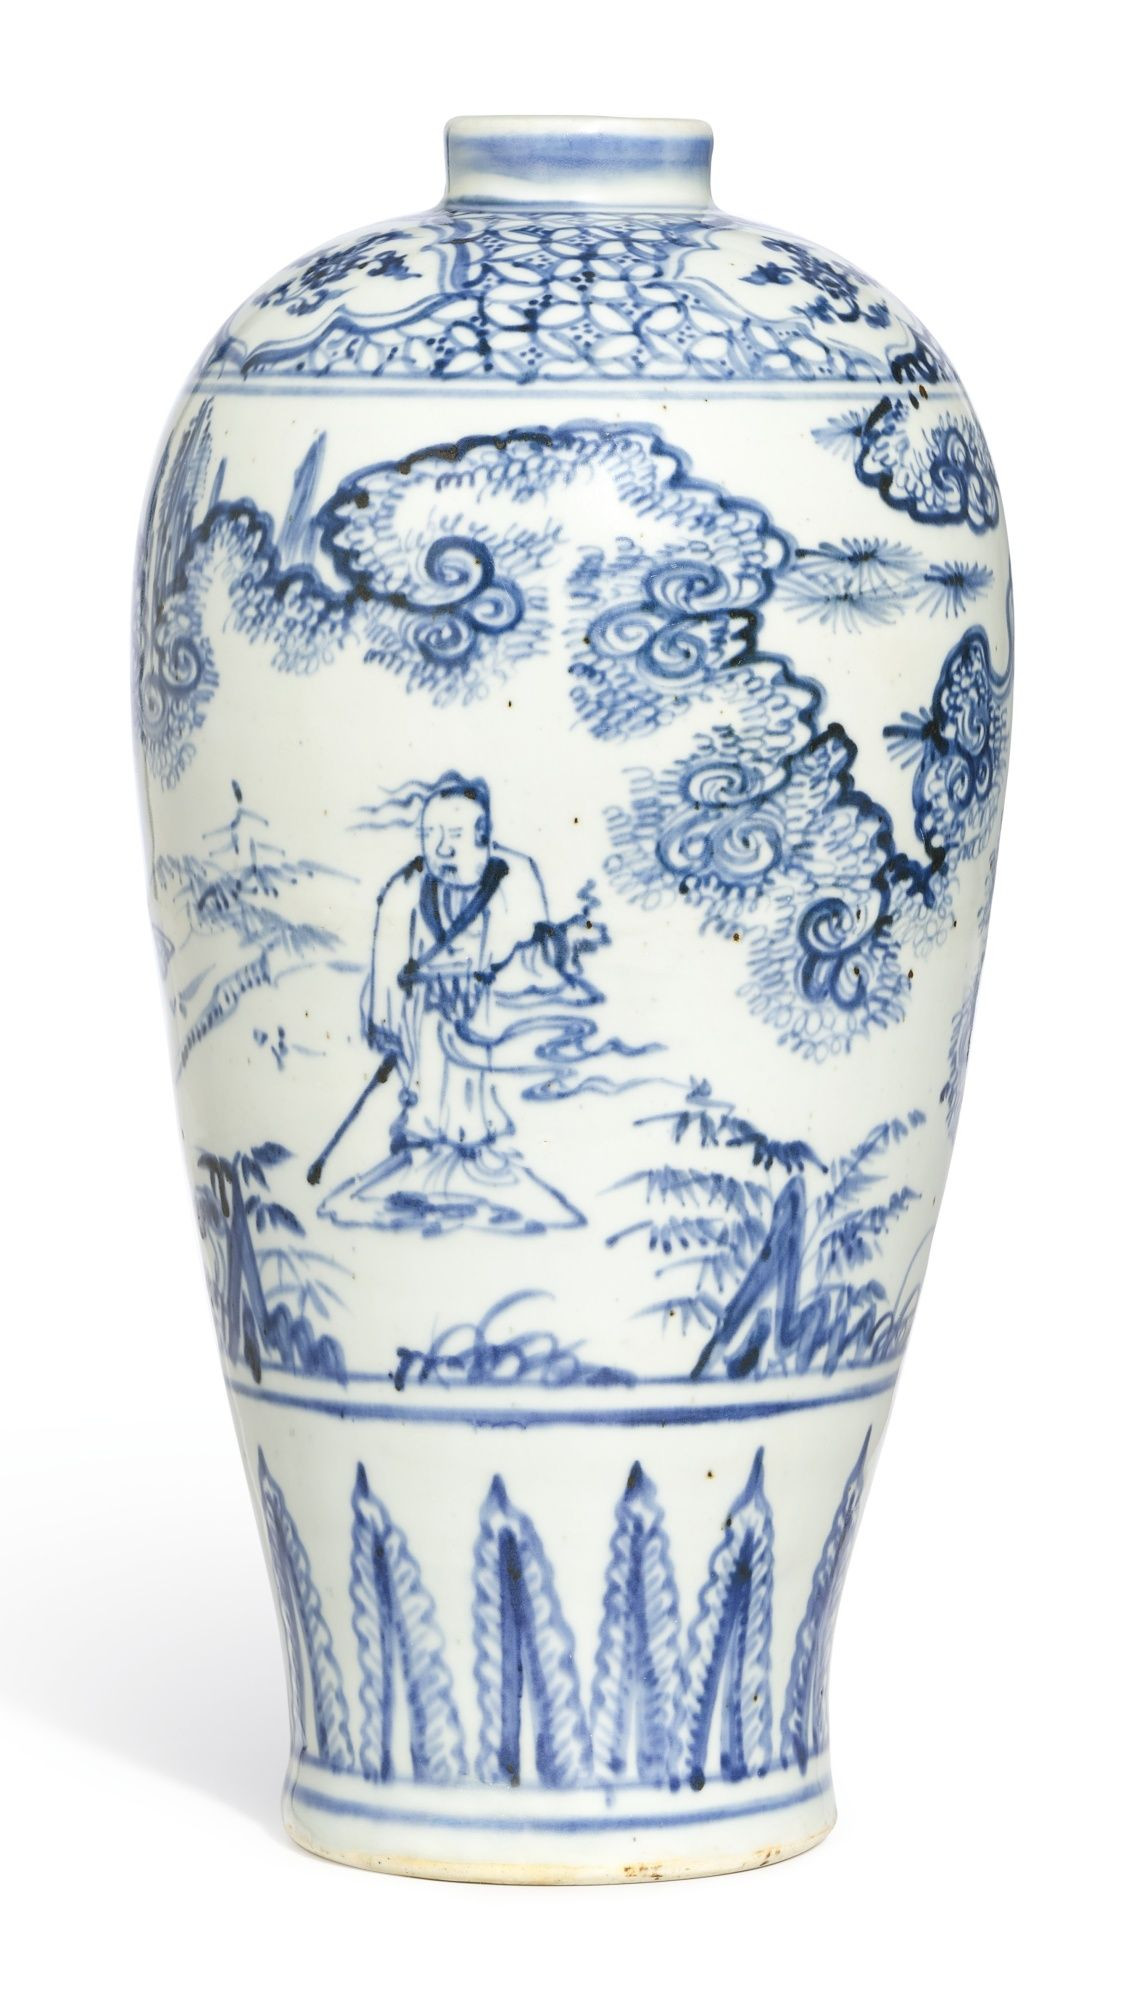 23 Amazing Antique White Porcelain Vases 2024 free download antique white porcelain vases of a blue and white figure meipingming dynasty 15th century with regard to vase